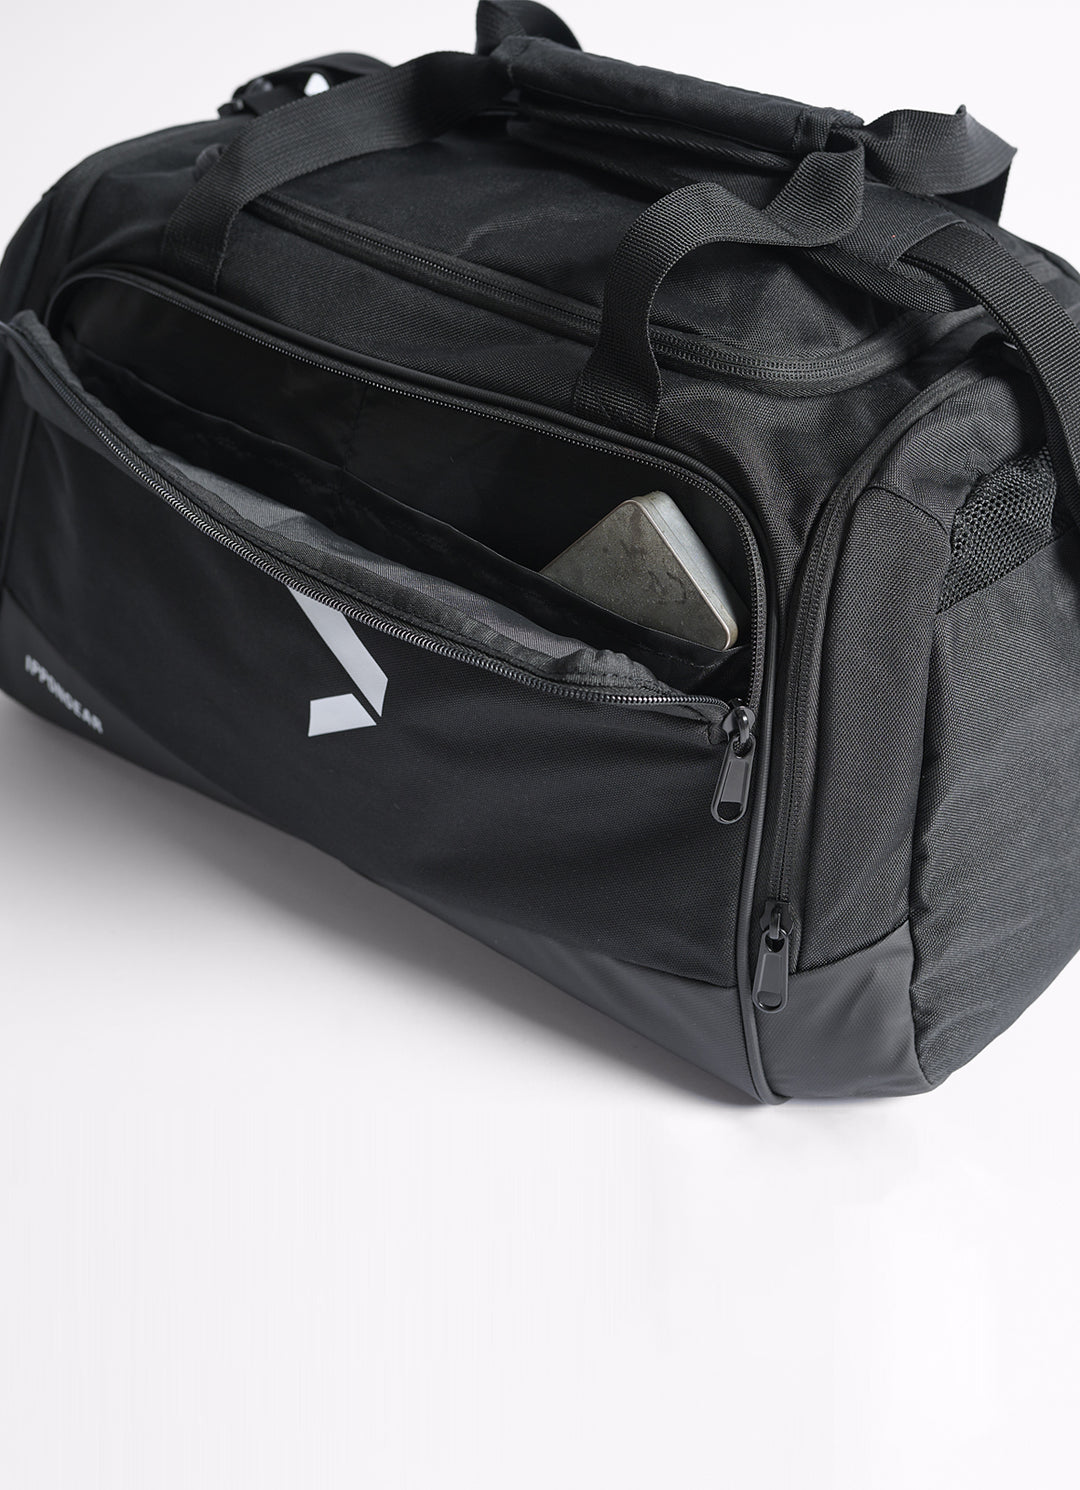 IPPON GEAR 2 in 1 sports bag Fighter